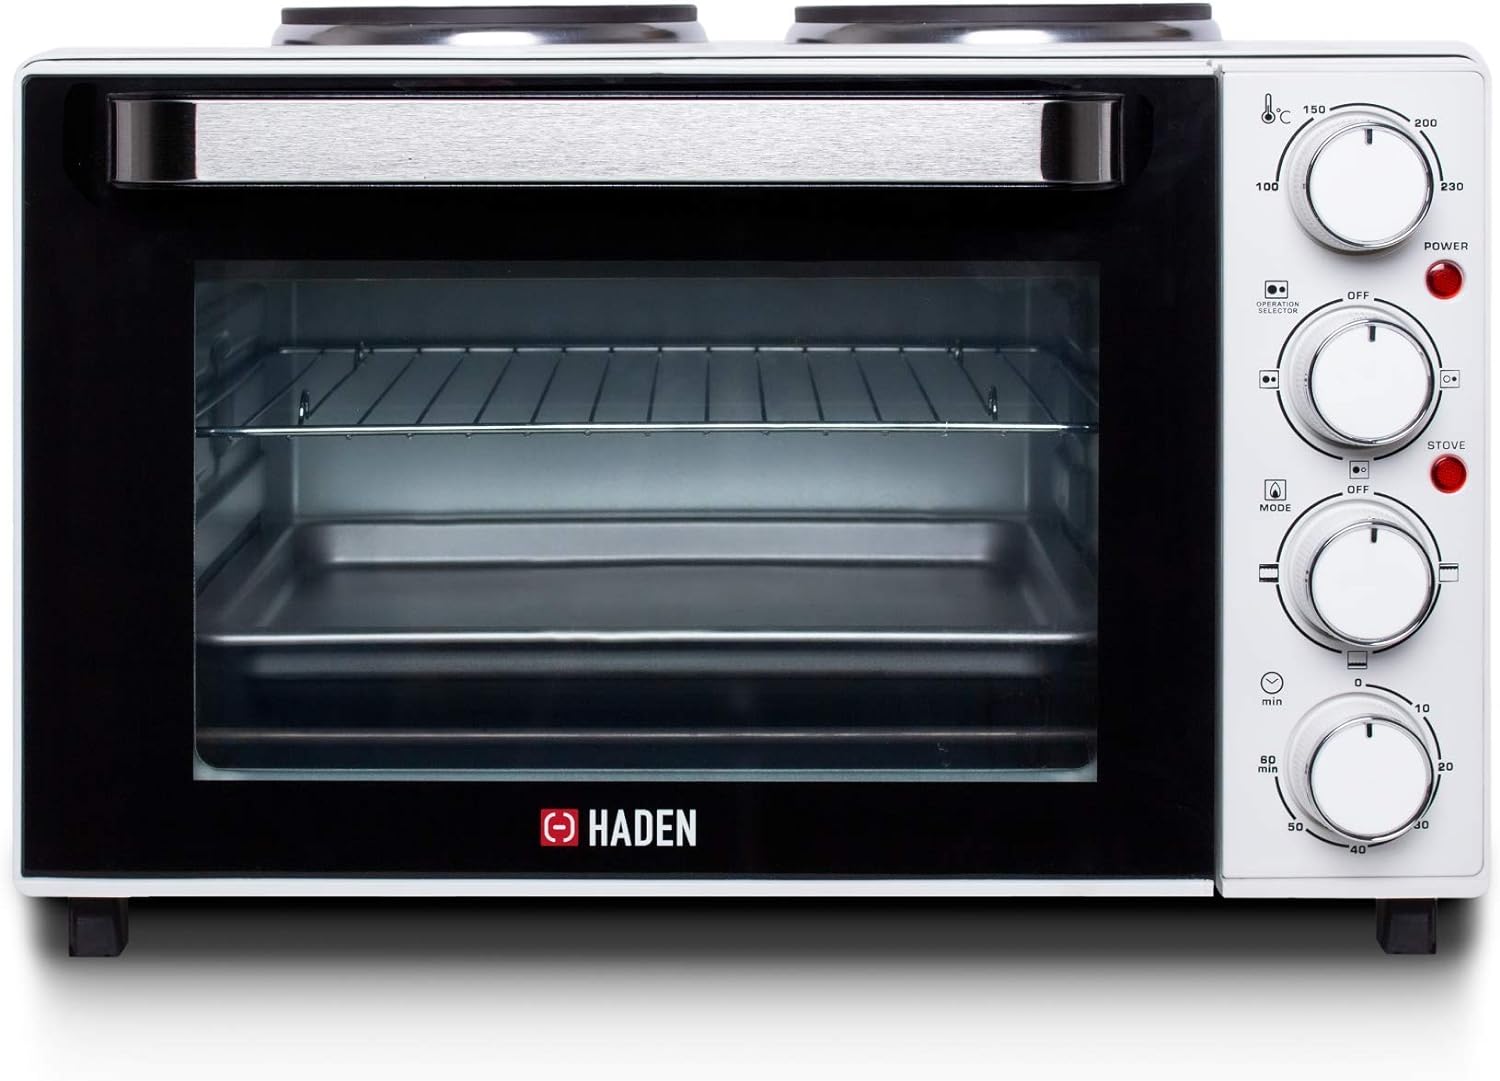 All-in-One Mini Oven with Hob: Our 25L Haden electric mini oven with a built-in grill and hob offers versatile cooking, from baking to roasting, on any countertop or table top.